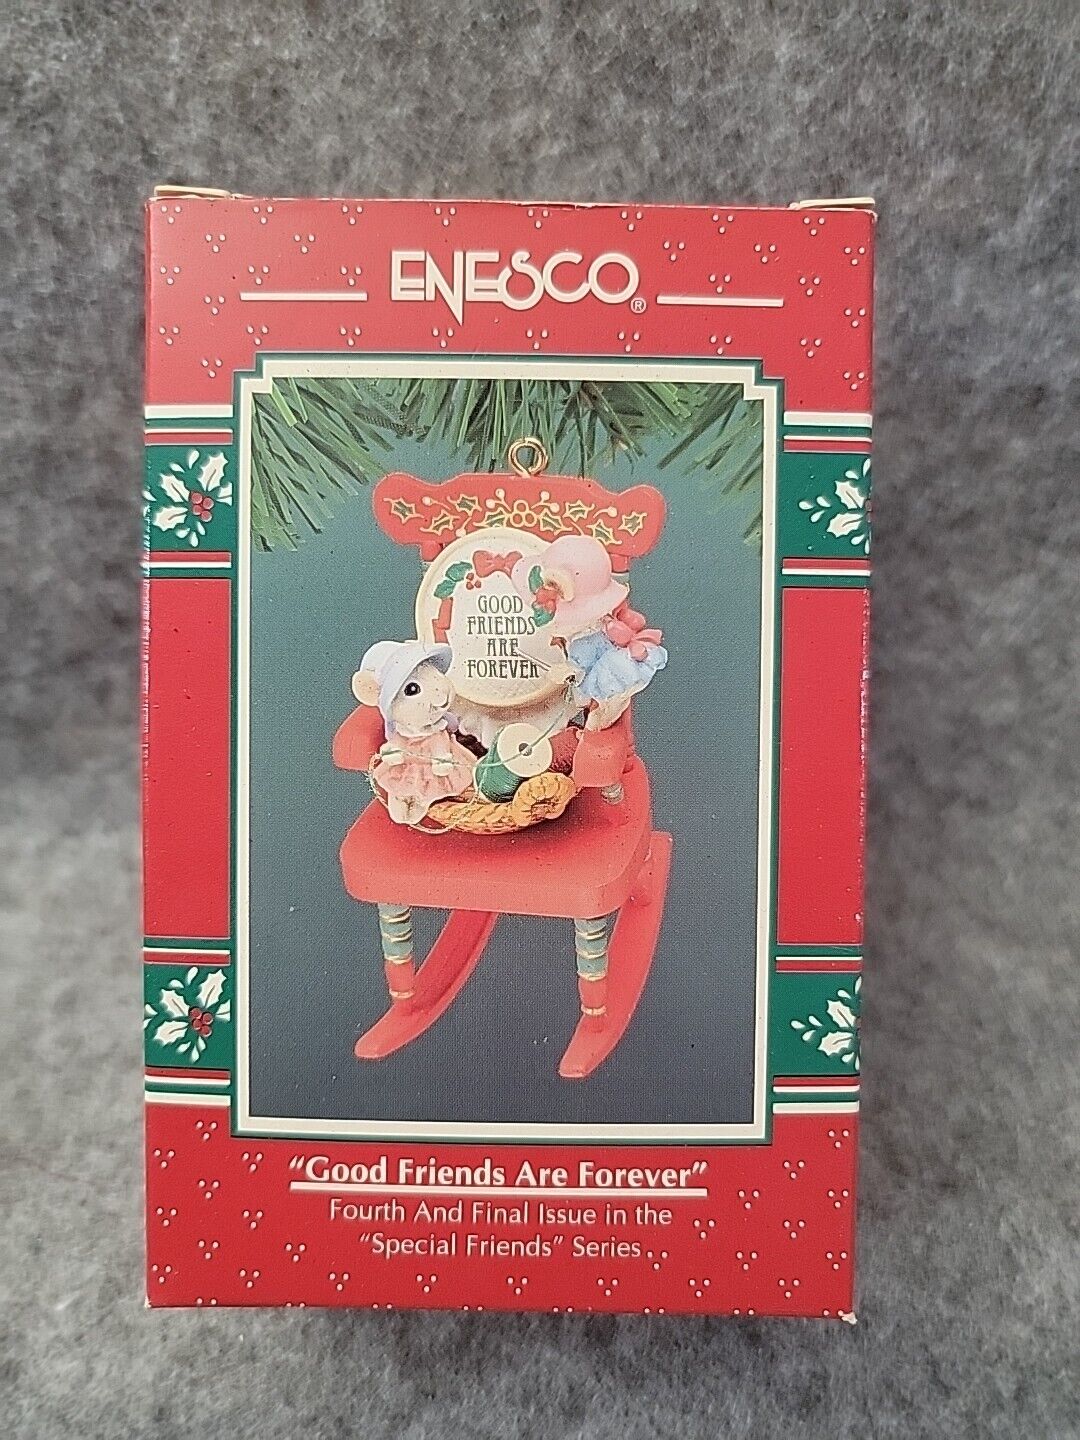 Enesco Christmas Ornament 1994 Good Friends Are Forever Mice Rocking Chair